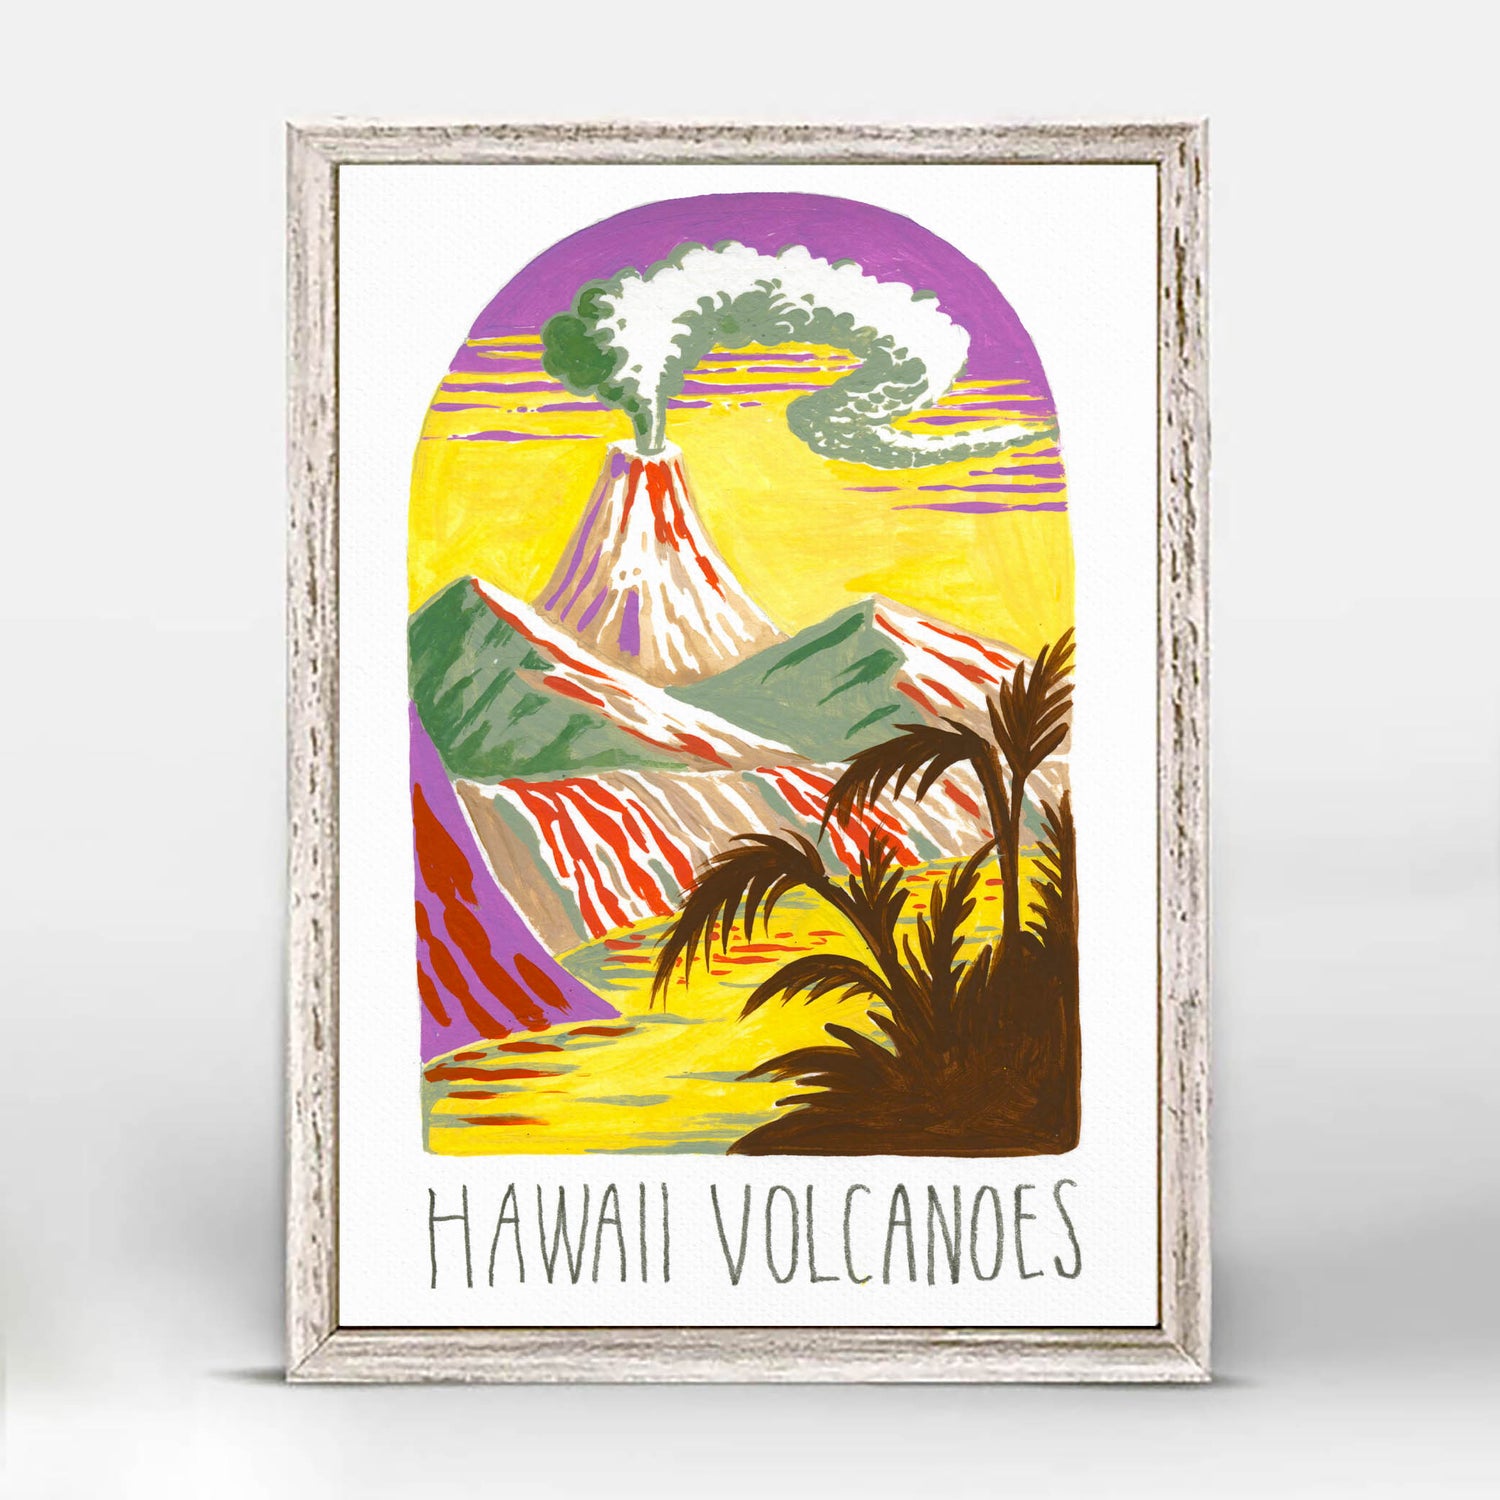 Hawaii Volcanoes National Park art with Kīlauea and Mauna Loa active volcanoes; trendy illustration by Angela Staehling